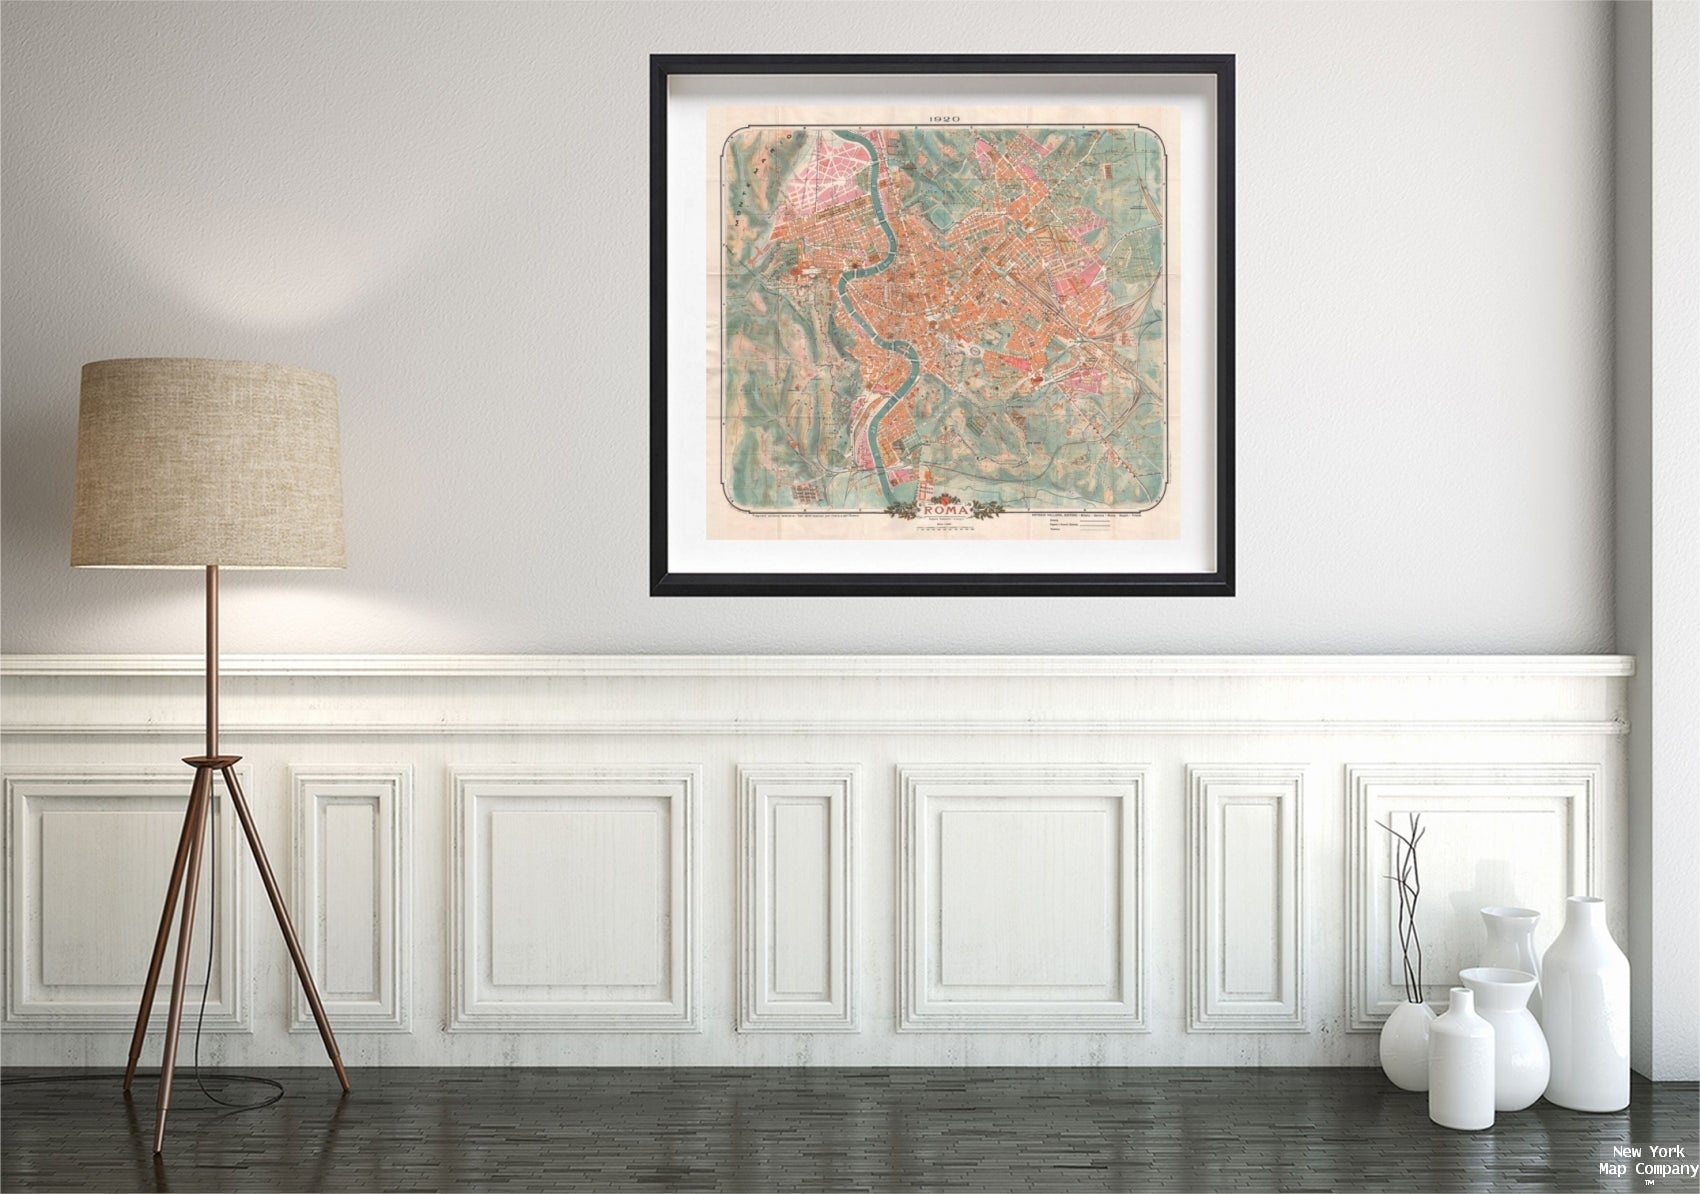 A highly decorative 1920 map of Rome by Augusto Trabacchi. This map is a combination of a traditional street plan and a topographical map. For the developed urban center of Rome, streets are named and blocks are shaded orange. Parks are also noted. For s